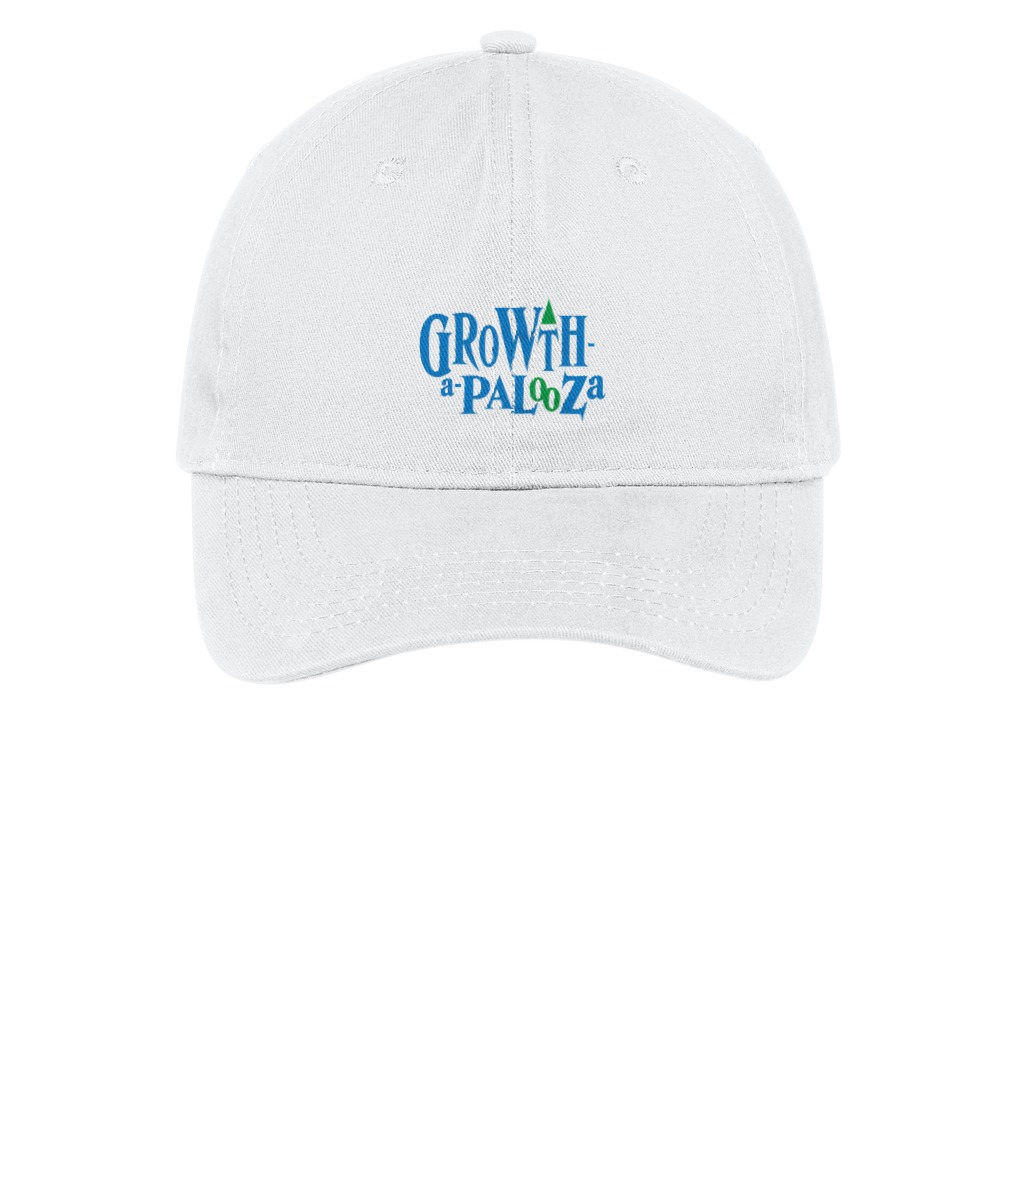 Growth-a-Palooza Embroidered Cap